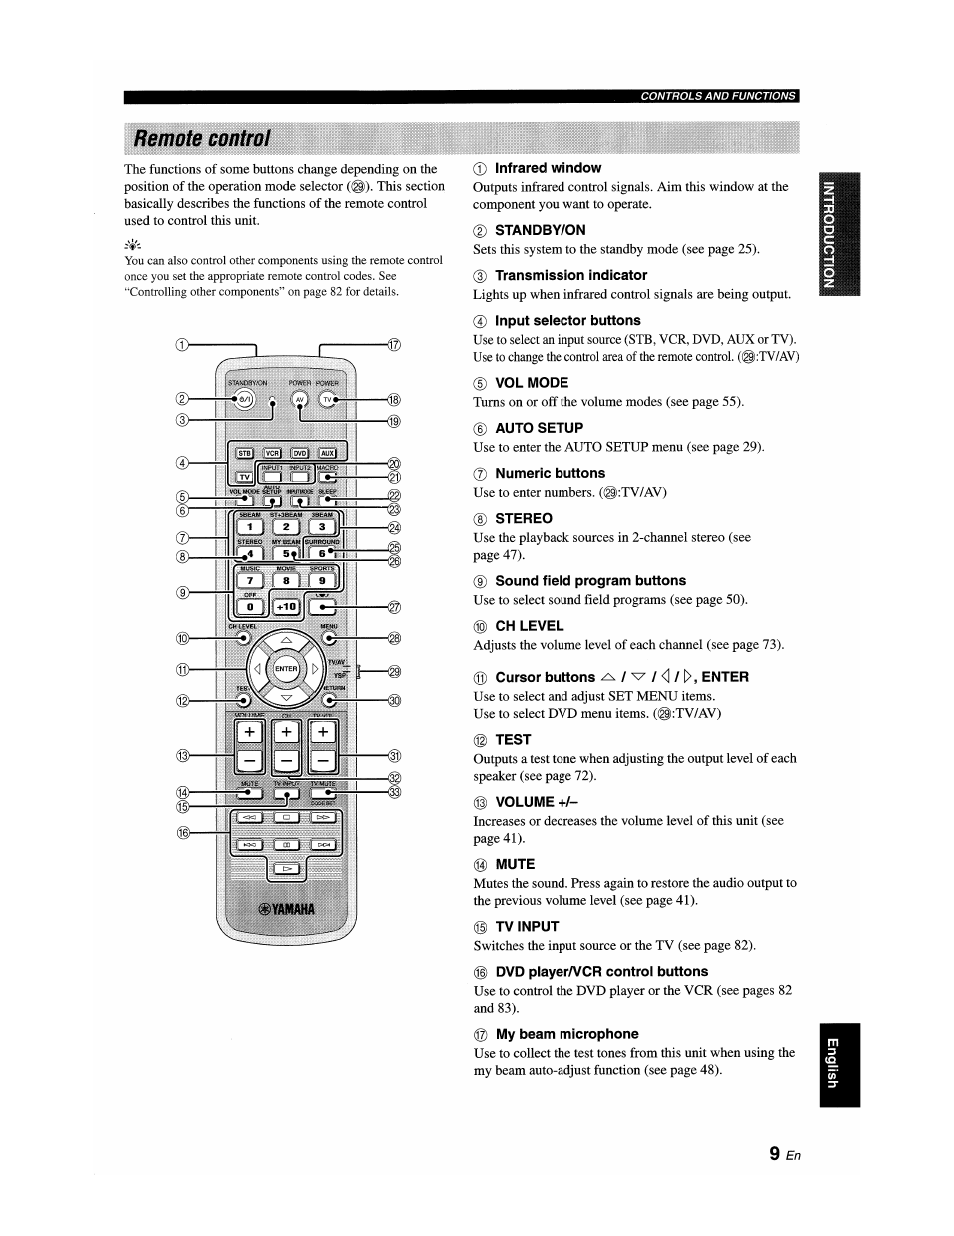 Remote control, 0 infrared window, 2) standby/on | 3) transmission indicator, 0 input selector buttons, Vol mode, Auto setup, Numeric buttons, Stereo, Sound field program buttons | Yamaha YSP-1100 User Manual | Page 13 / 104